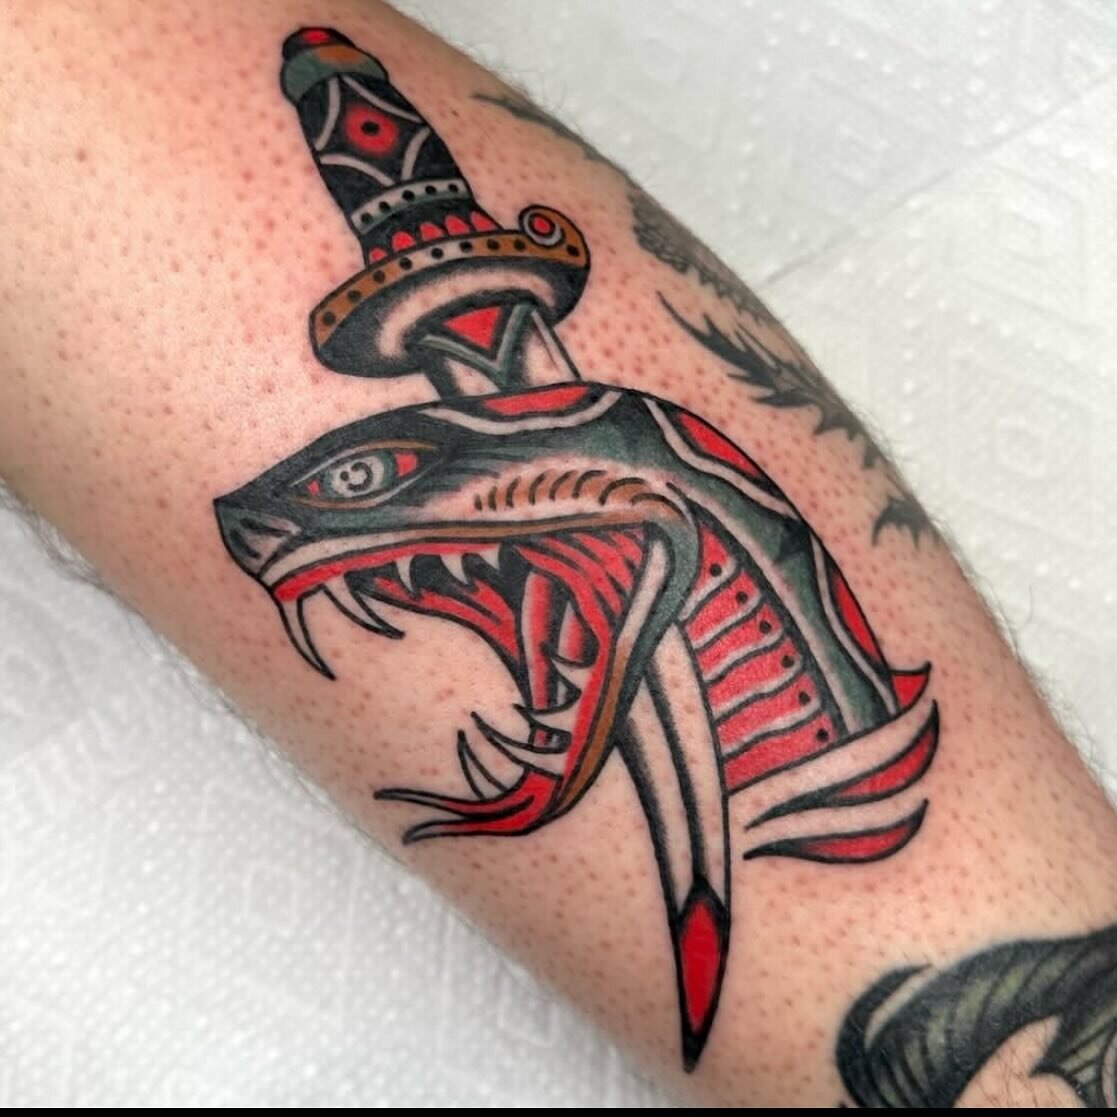 stabbed the snake

made by: @carbellatattoo - To book with Carissa, fill out the form linked in her bio! 😎

#snakehead #daggertattoo #snaketattoo